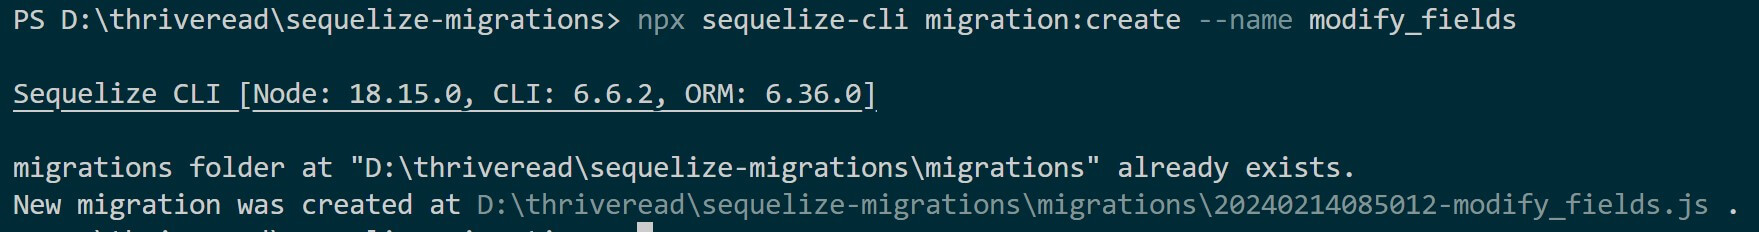 Create|Add New Fields to Existing Sequelize Migration Model